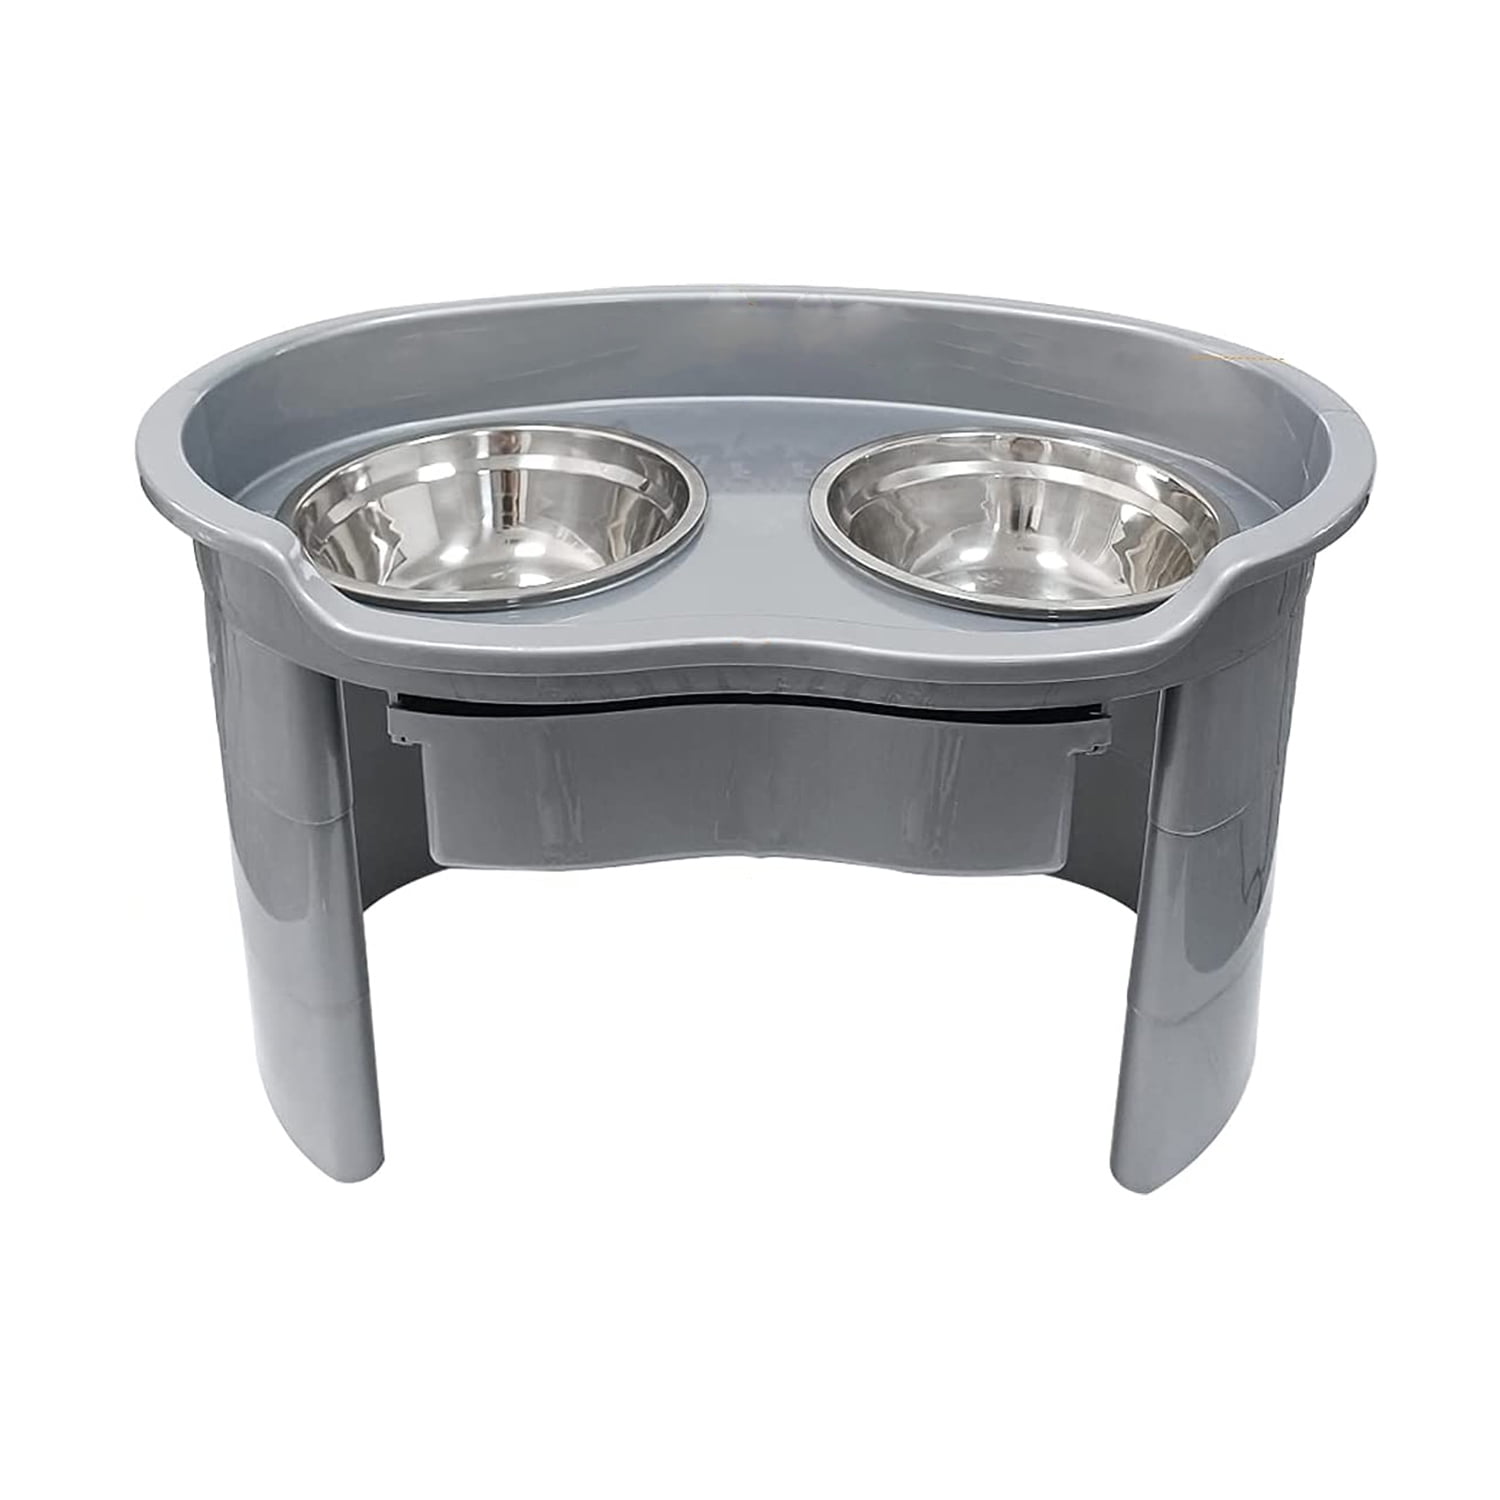 Elevated Dog Bowls Adjustable Raised Dog Bowl With 2 Stainless Steel 1.5l Dog  Food Bowls Stand Non-slip No Spill Dog Dish Adjusts To 3 Heights 2.8, 8